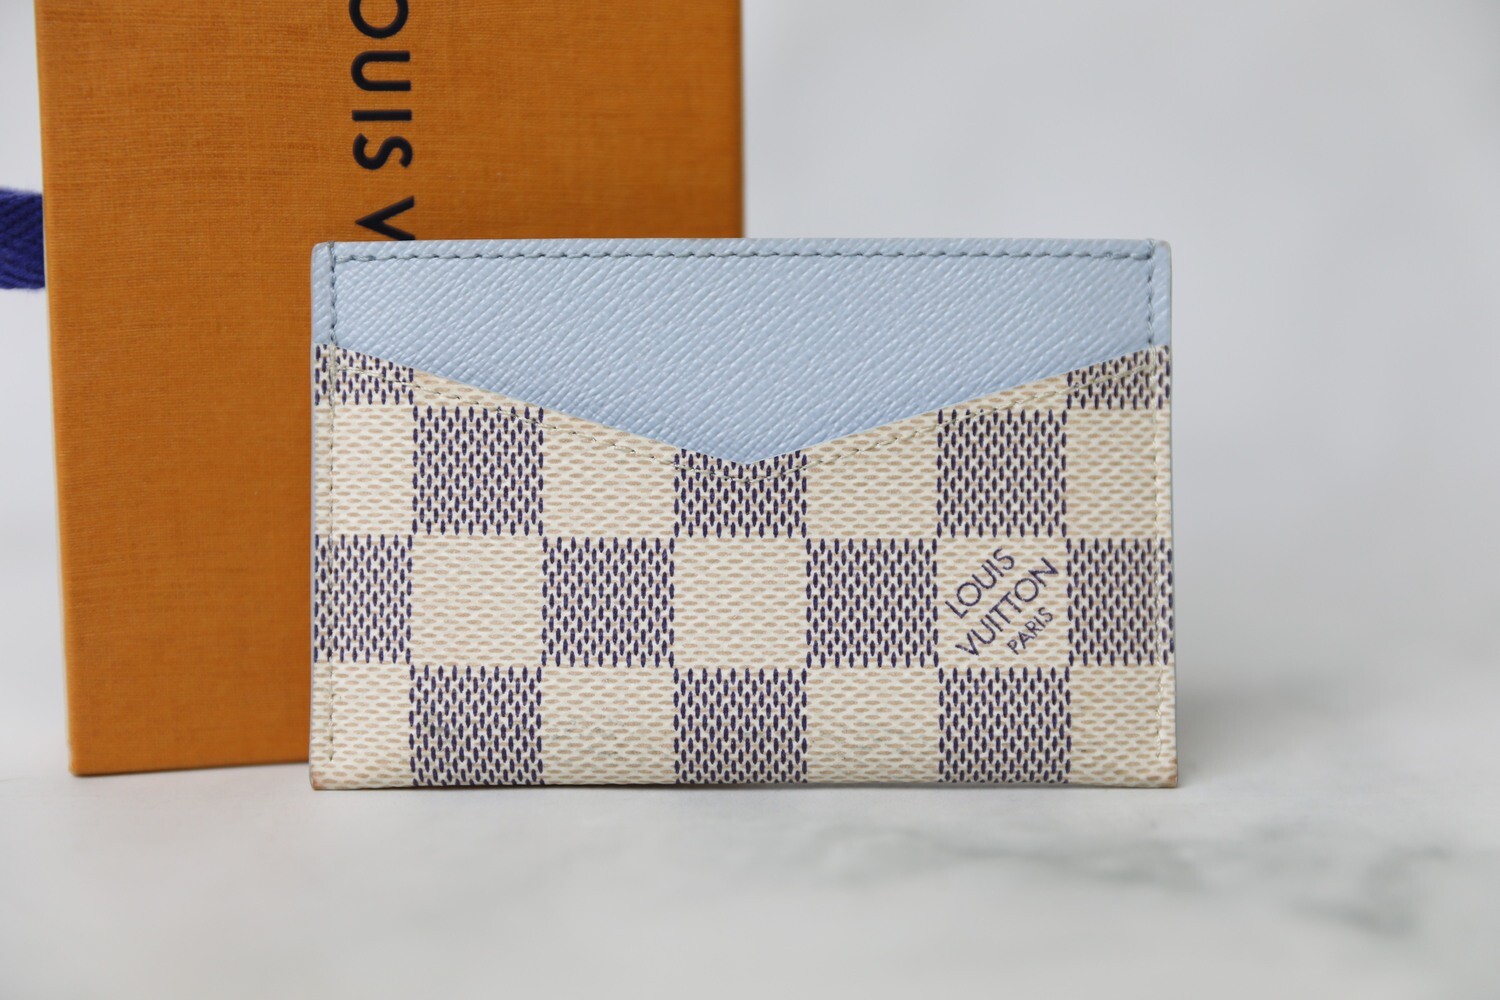 Louis Vuitton Daily CardHolder Olympe Cardholder, Azur and Blue